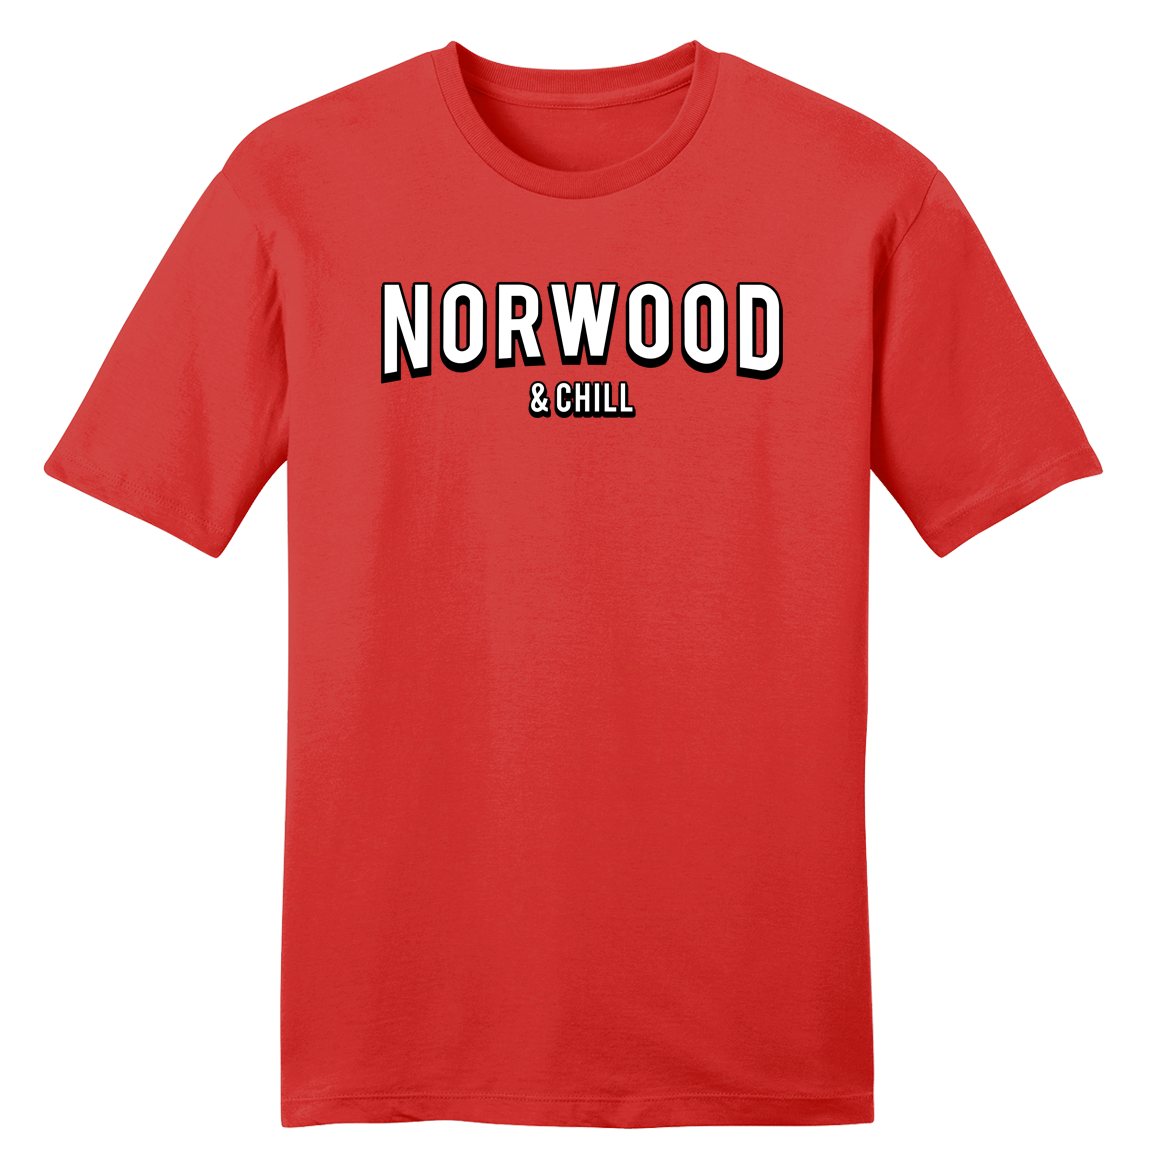 Norwood and Chill tee